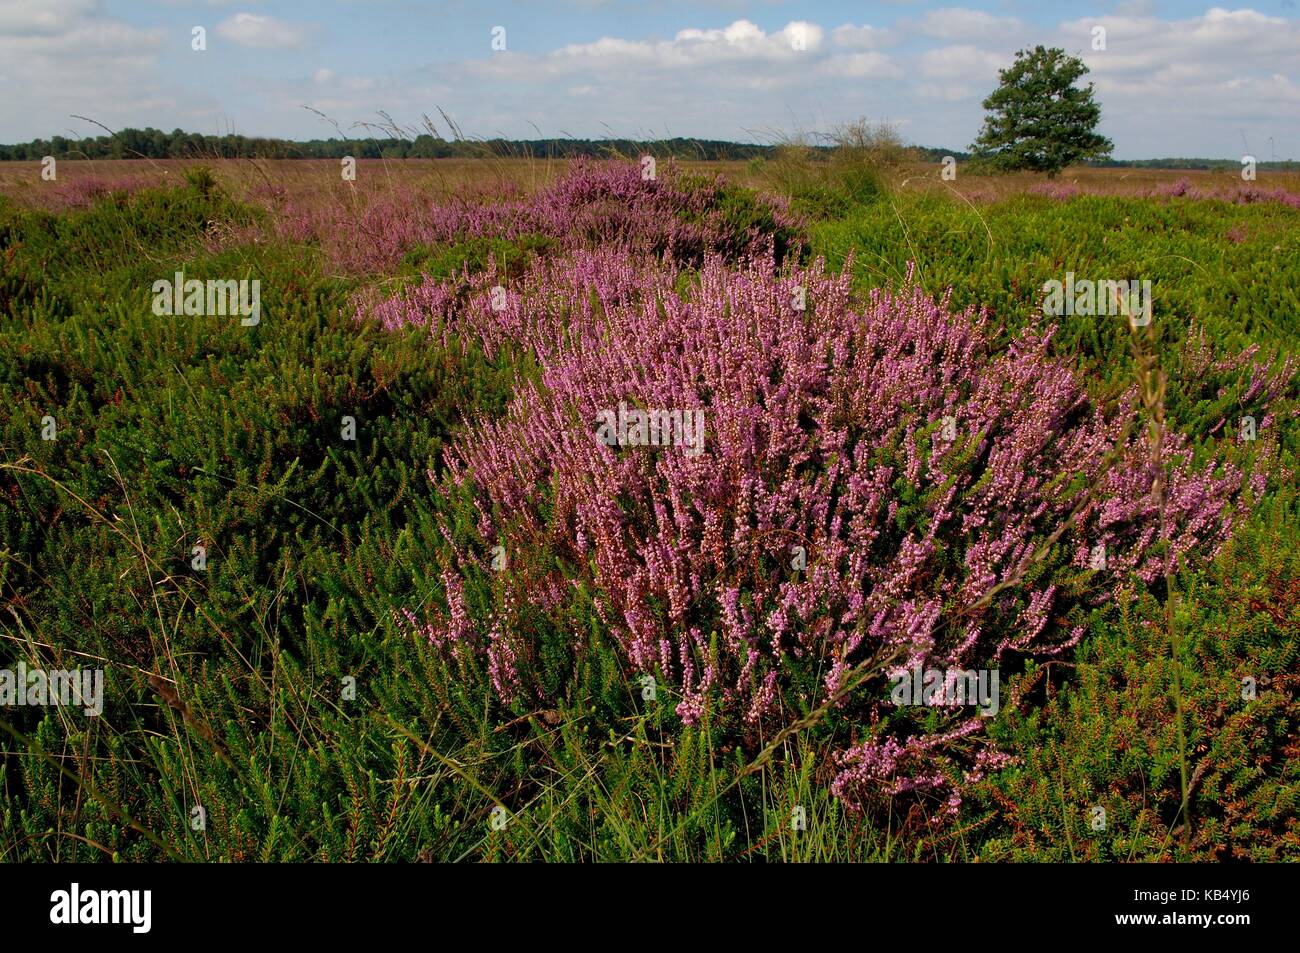 National Park Dwingelderveld in August with flowering Common Heather (Calluna vulgaris) and the evergreen Crowberry (Empetrum nigrum), The Netherlands, Drenthe, National Park Dwingelderveld Stock Photo